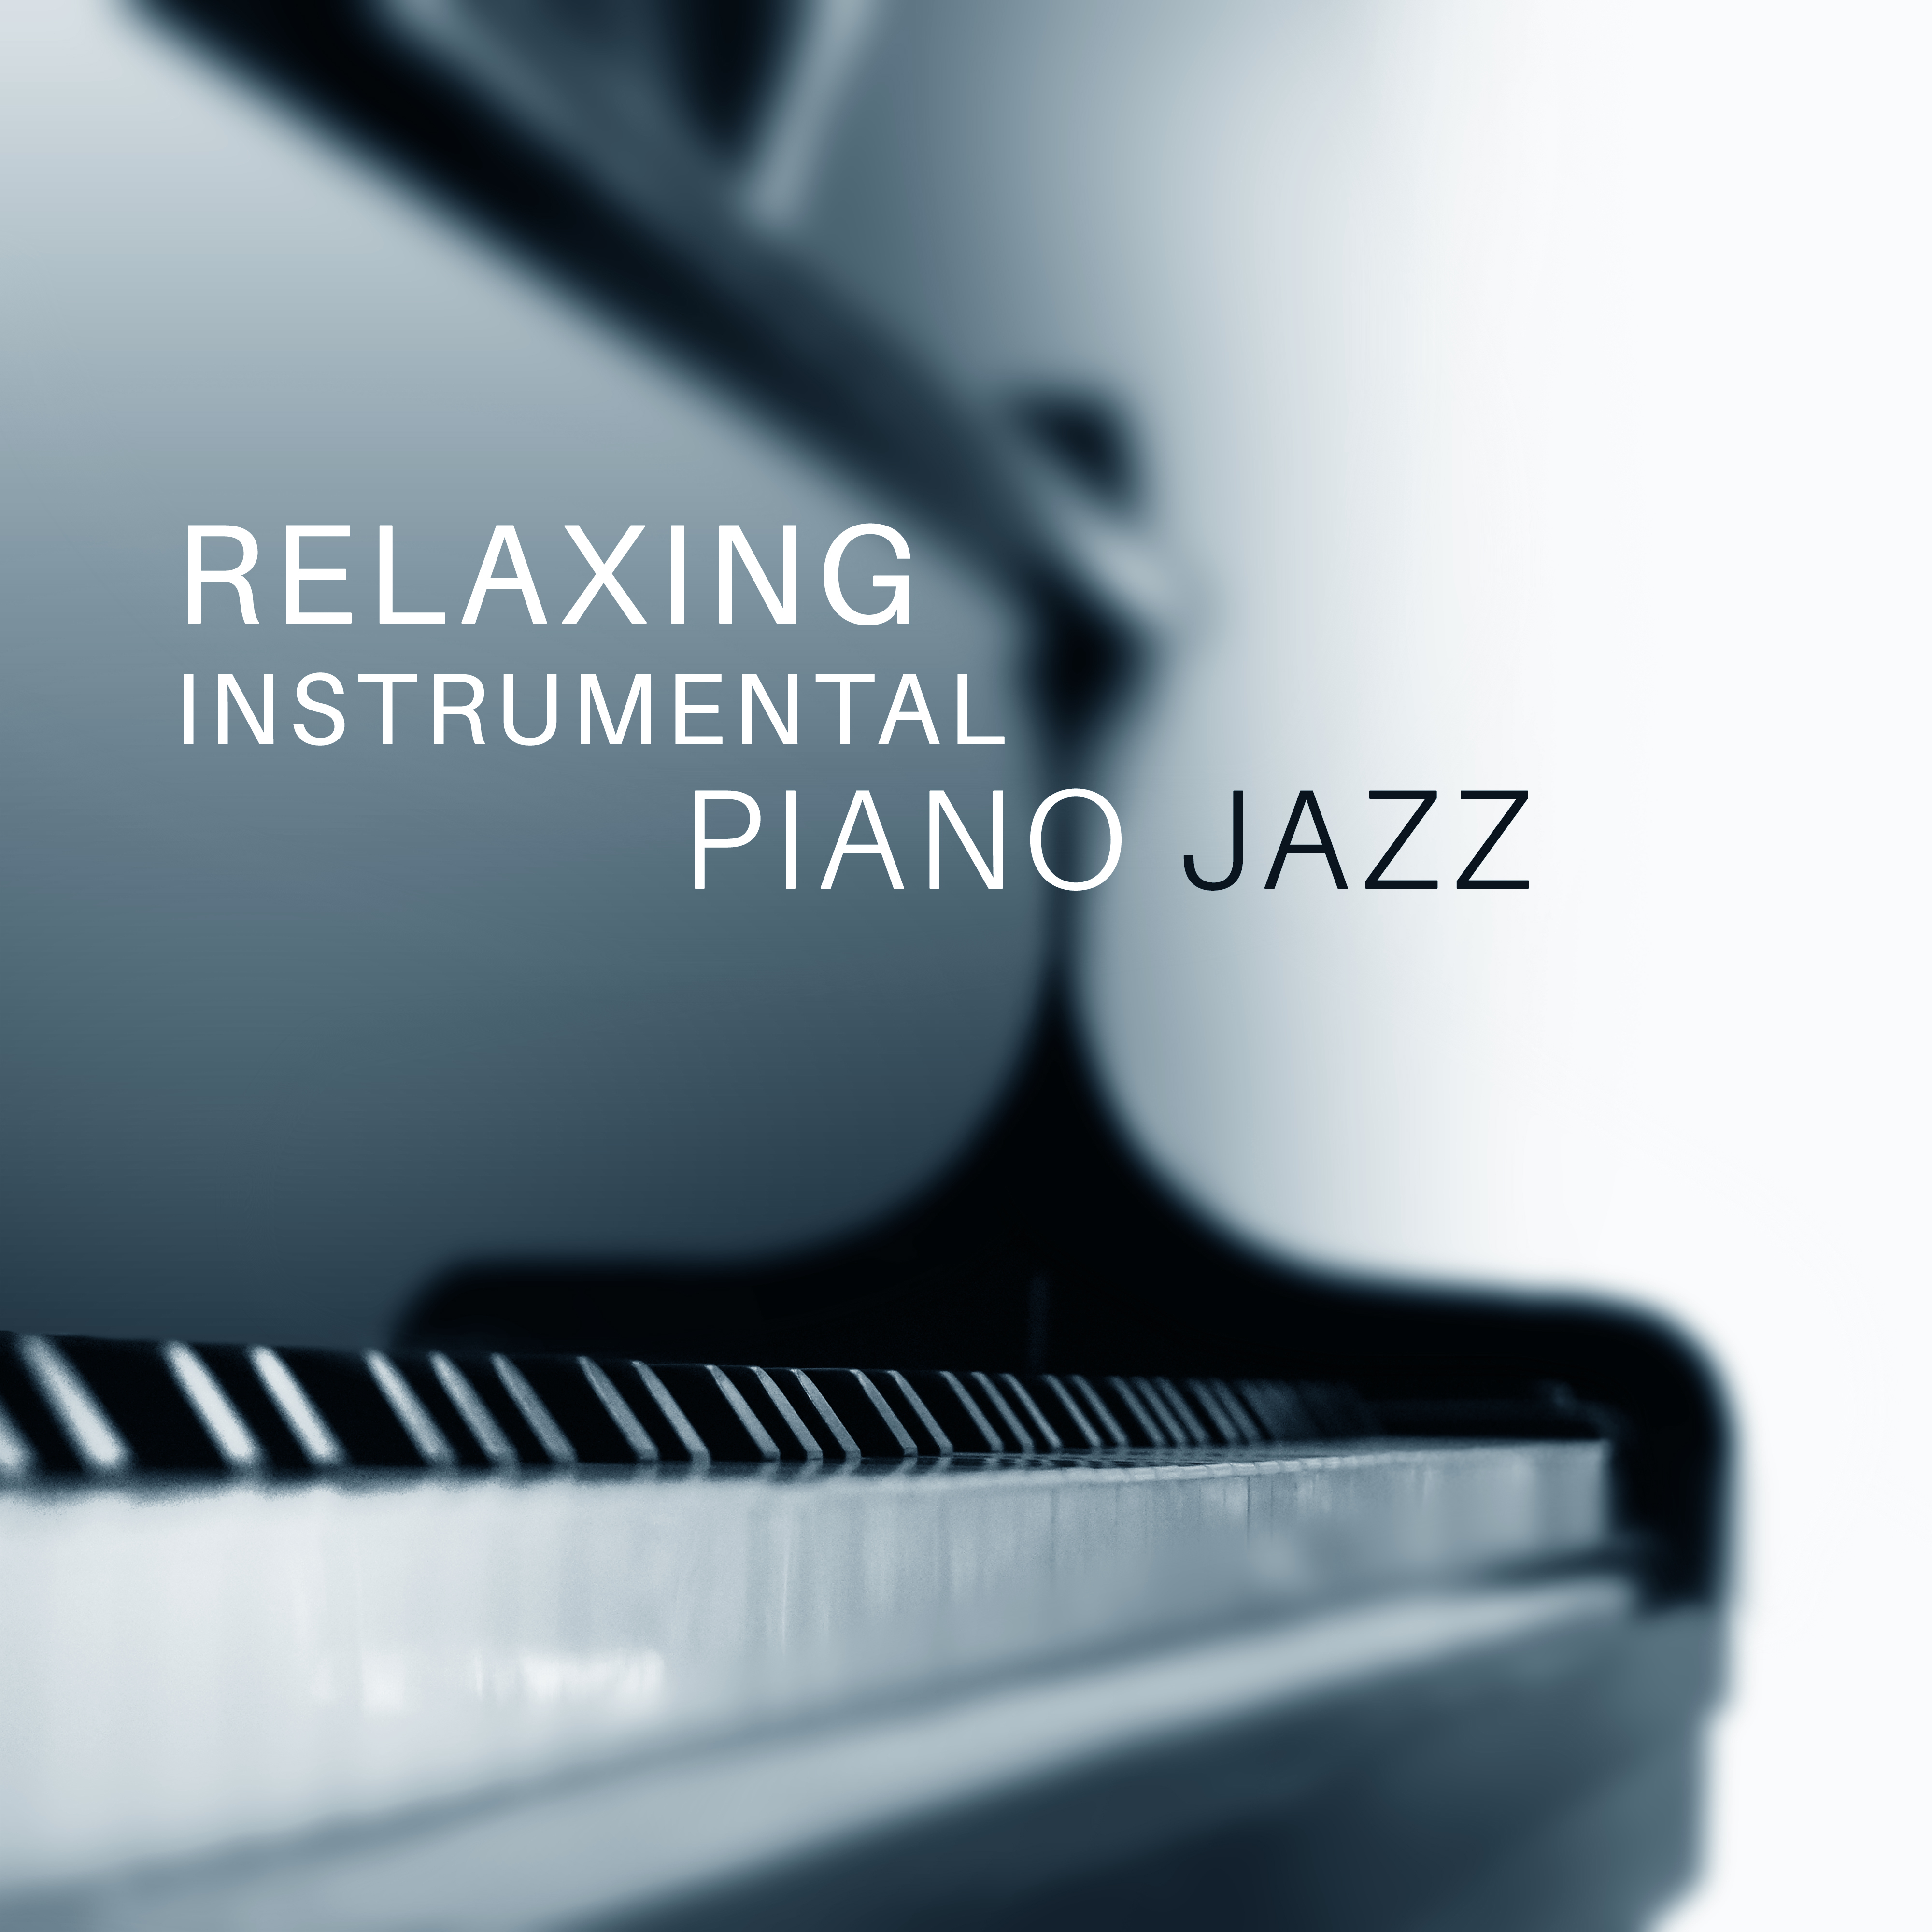 Relaxing Instrumental Piano Jazz  Smooth Jazz Sounds, Easy Listening, Peaceful Music, Stress Relief